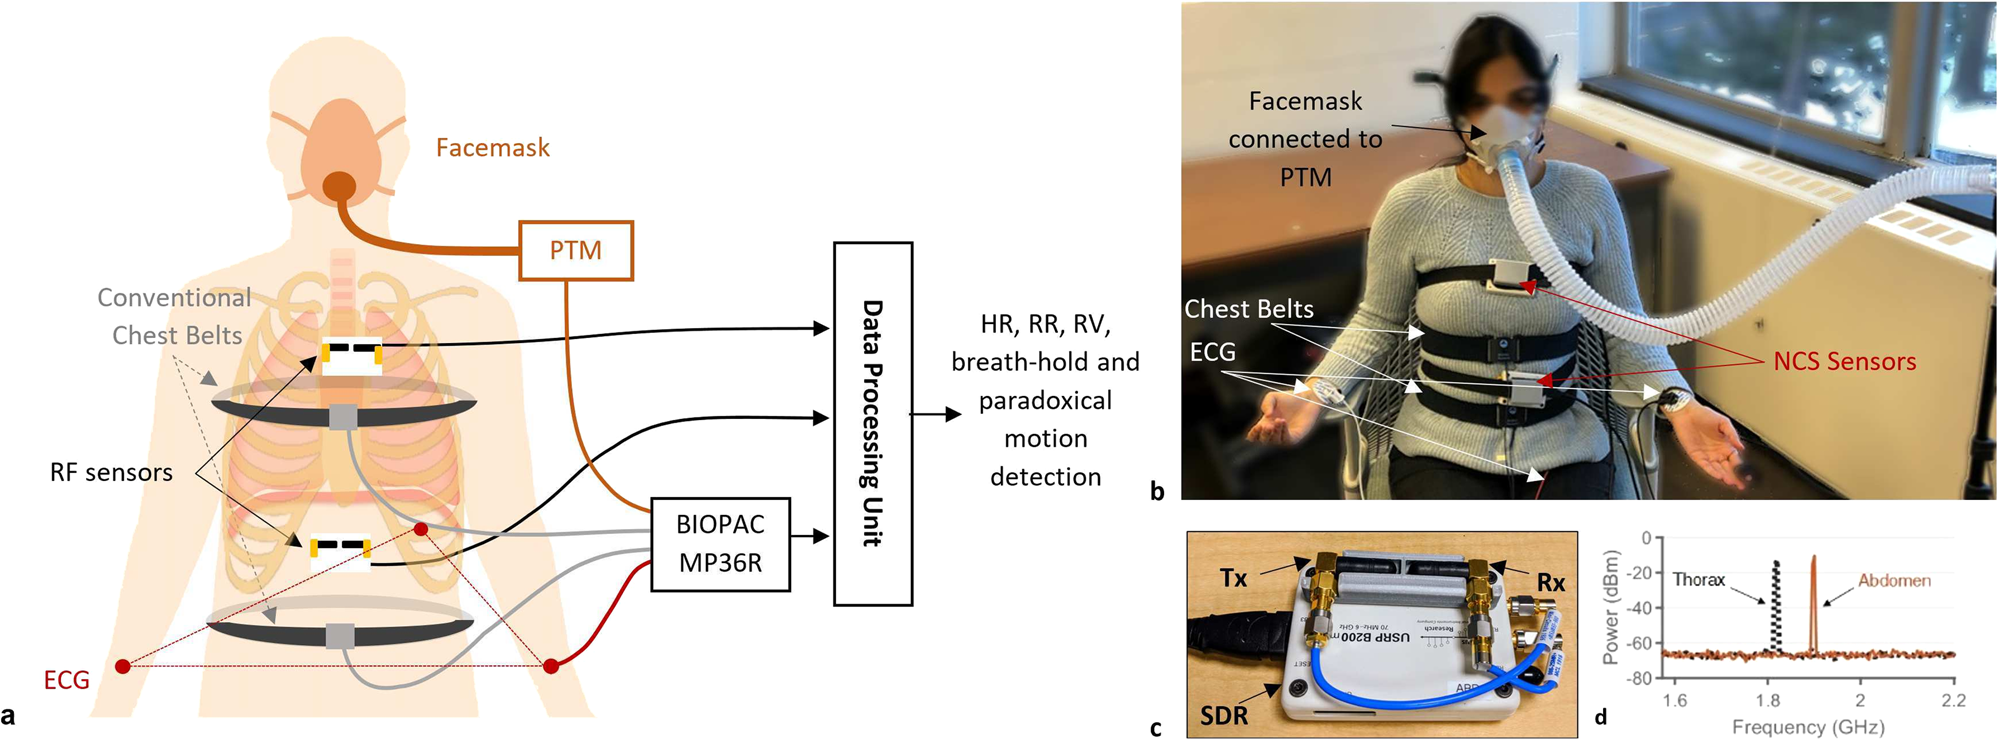 Wearable radio-frequency sensing of respiratory rate, respiratory volume,  and heart rate | npj Digital Medicine